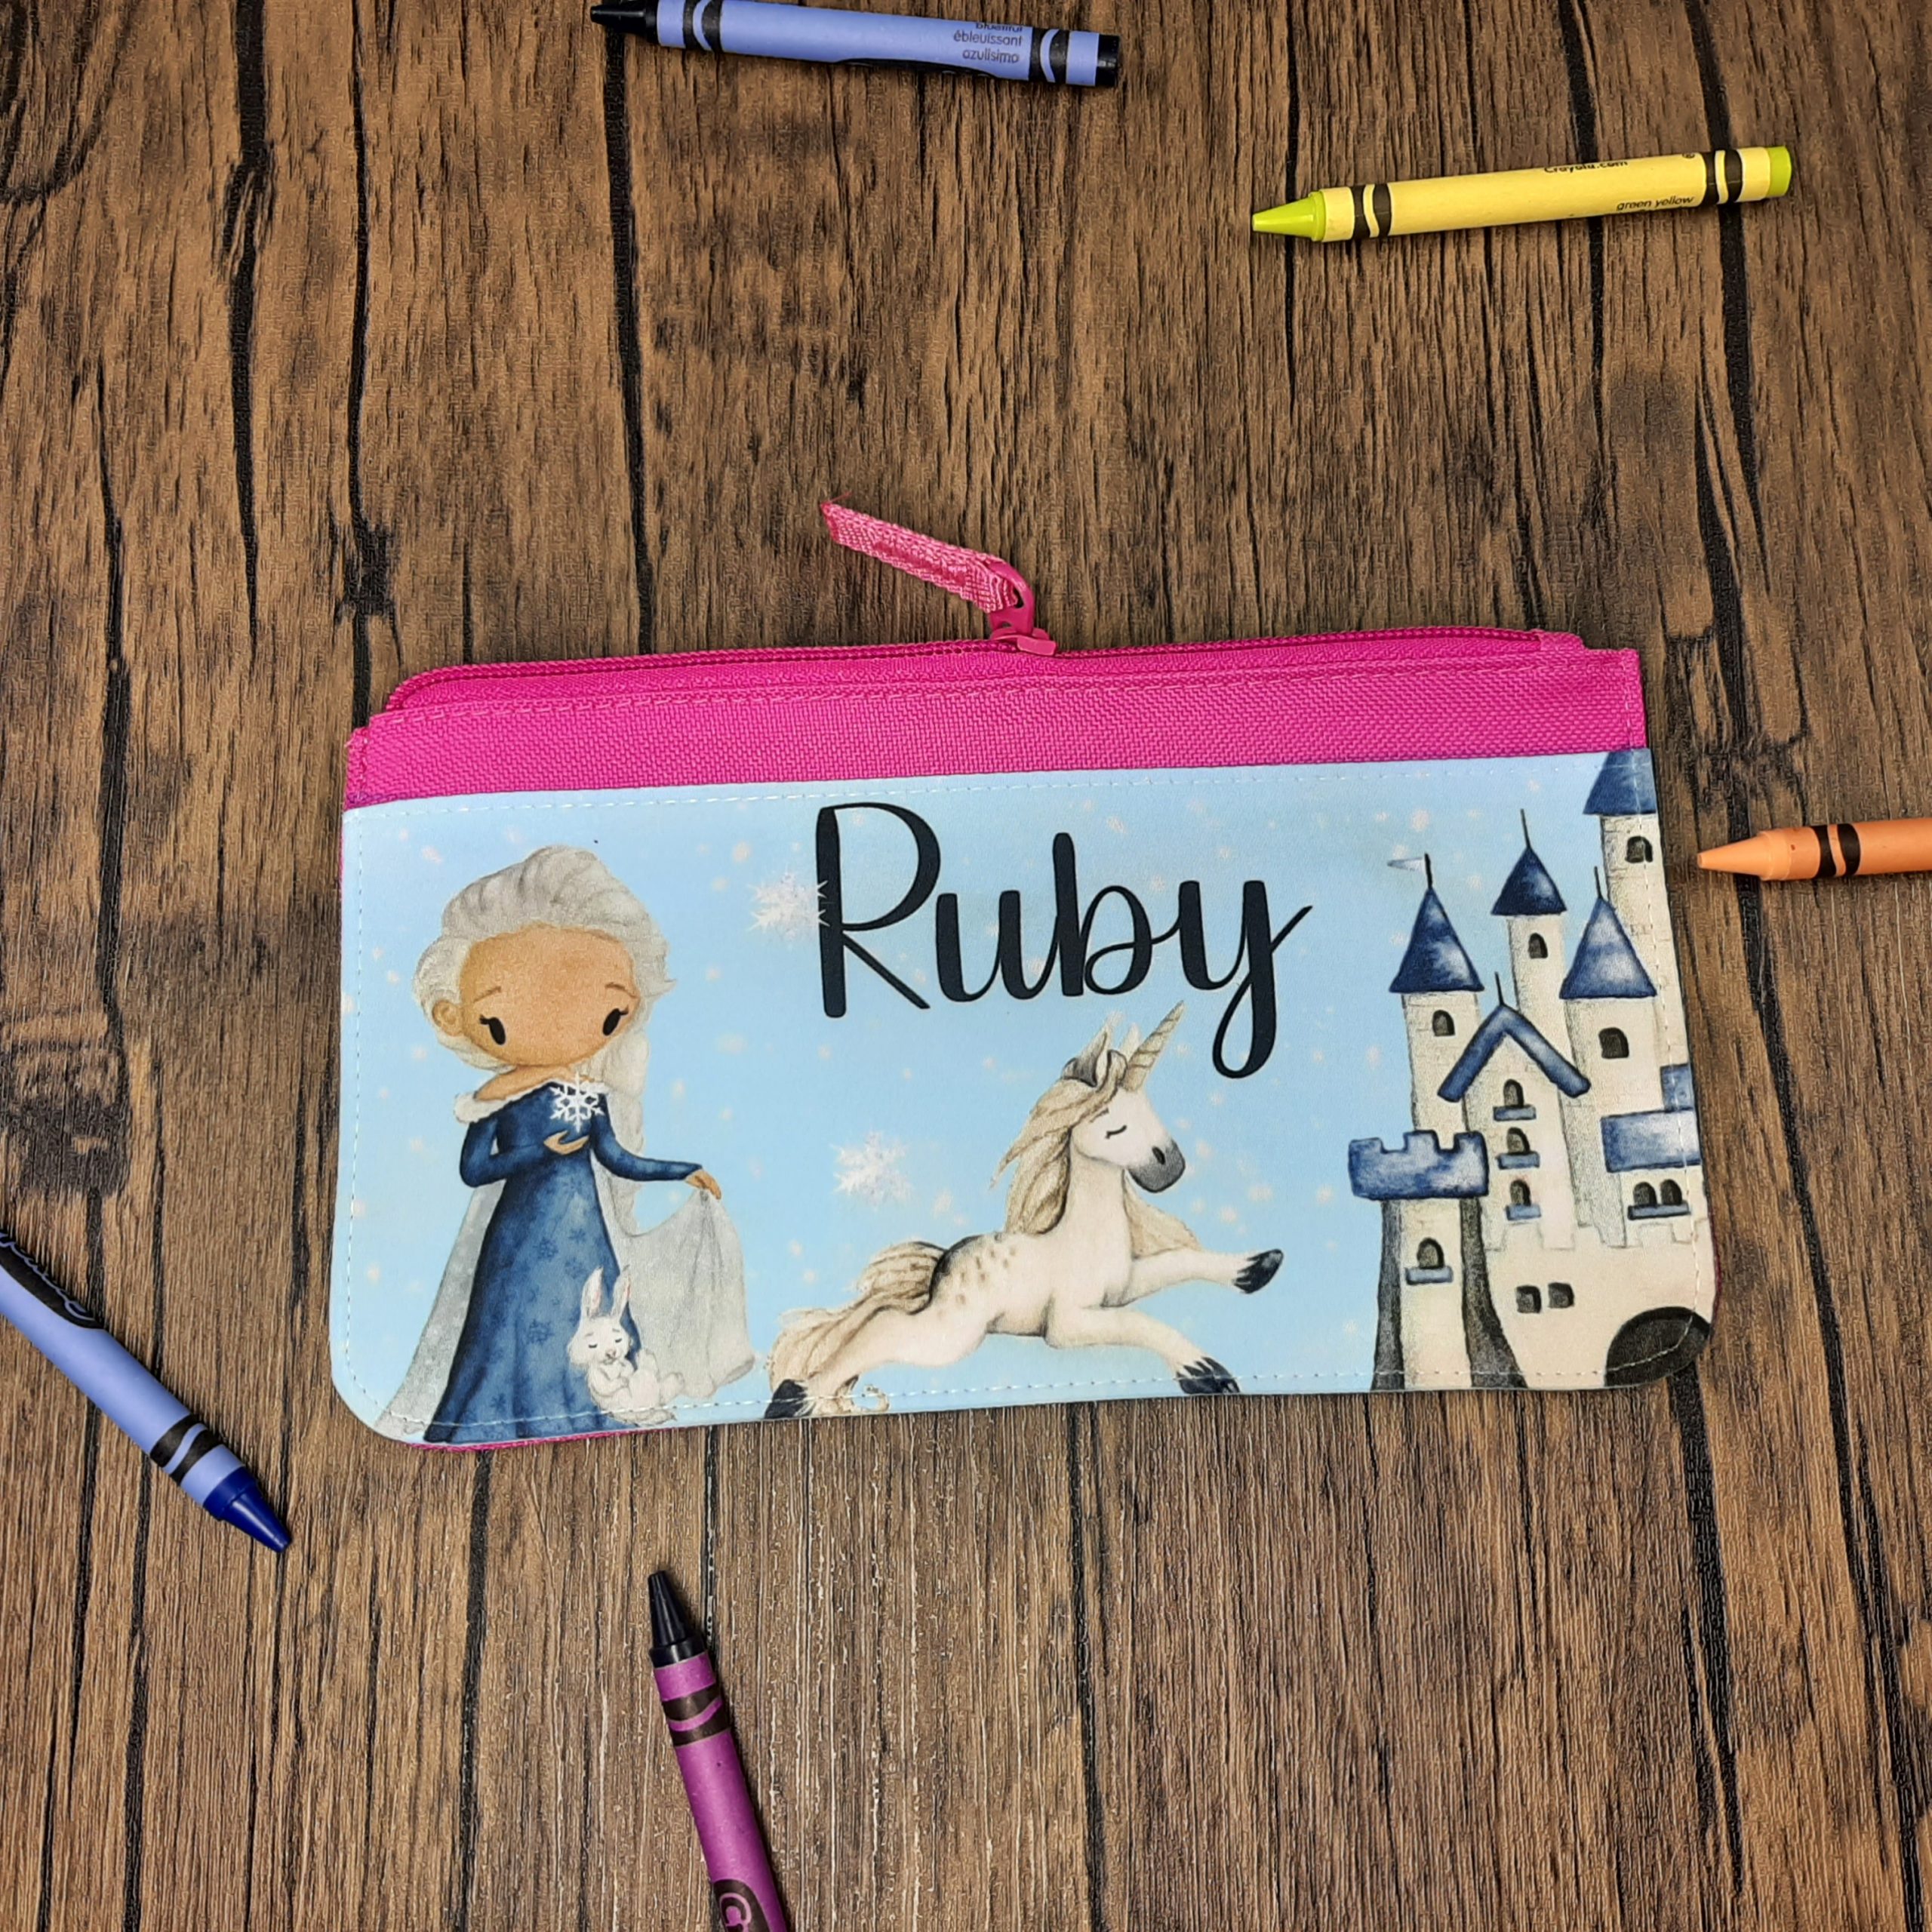 Printed Fabric Pencil Case personalised with name and frozen elsa disney ice queen and unicorn design in pink